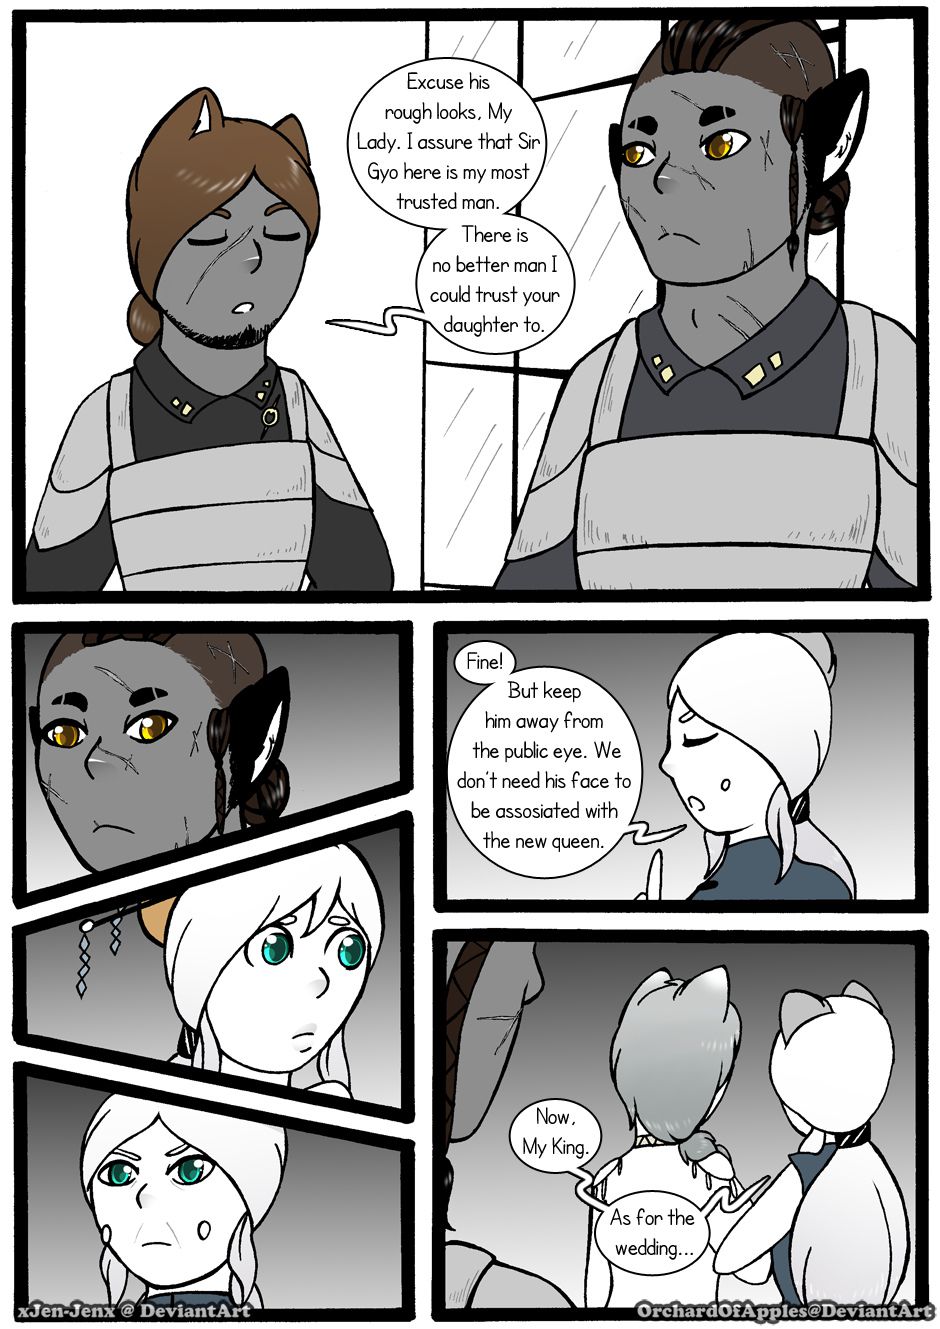 [Jeny-jen94] Between Kings and Queens [Ongoing] 201